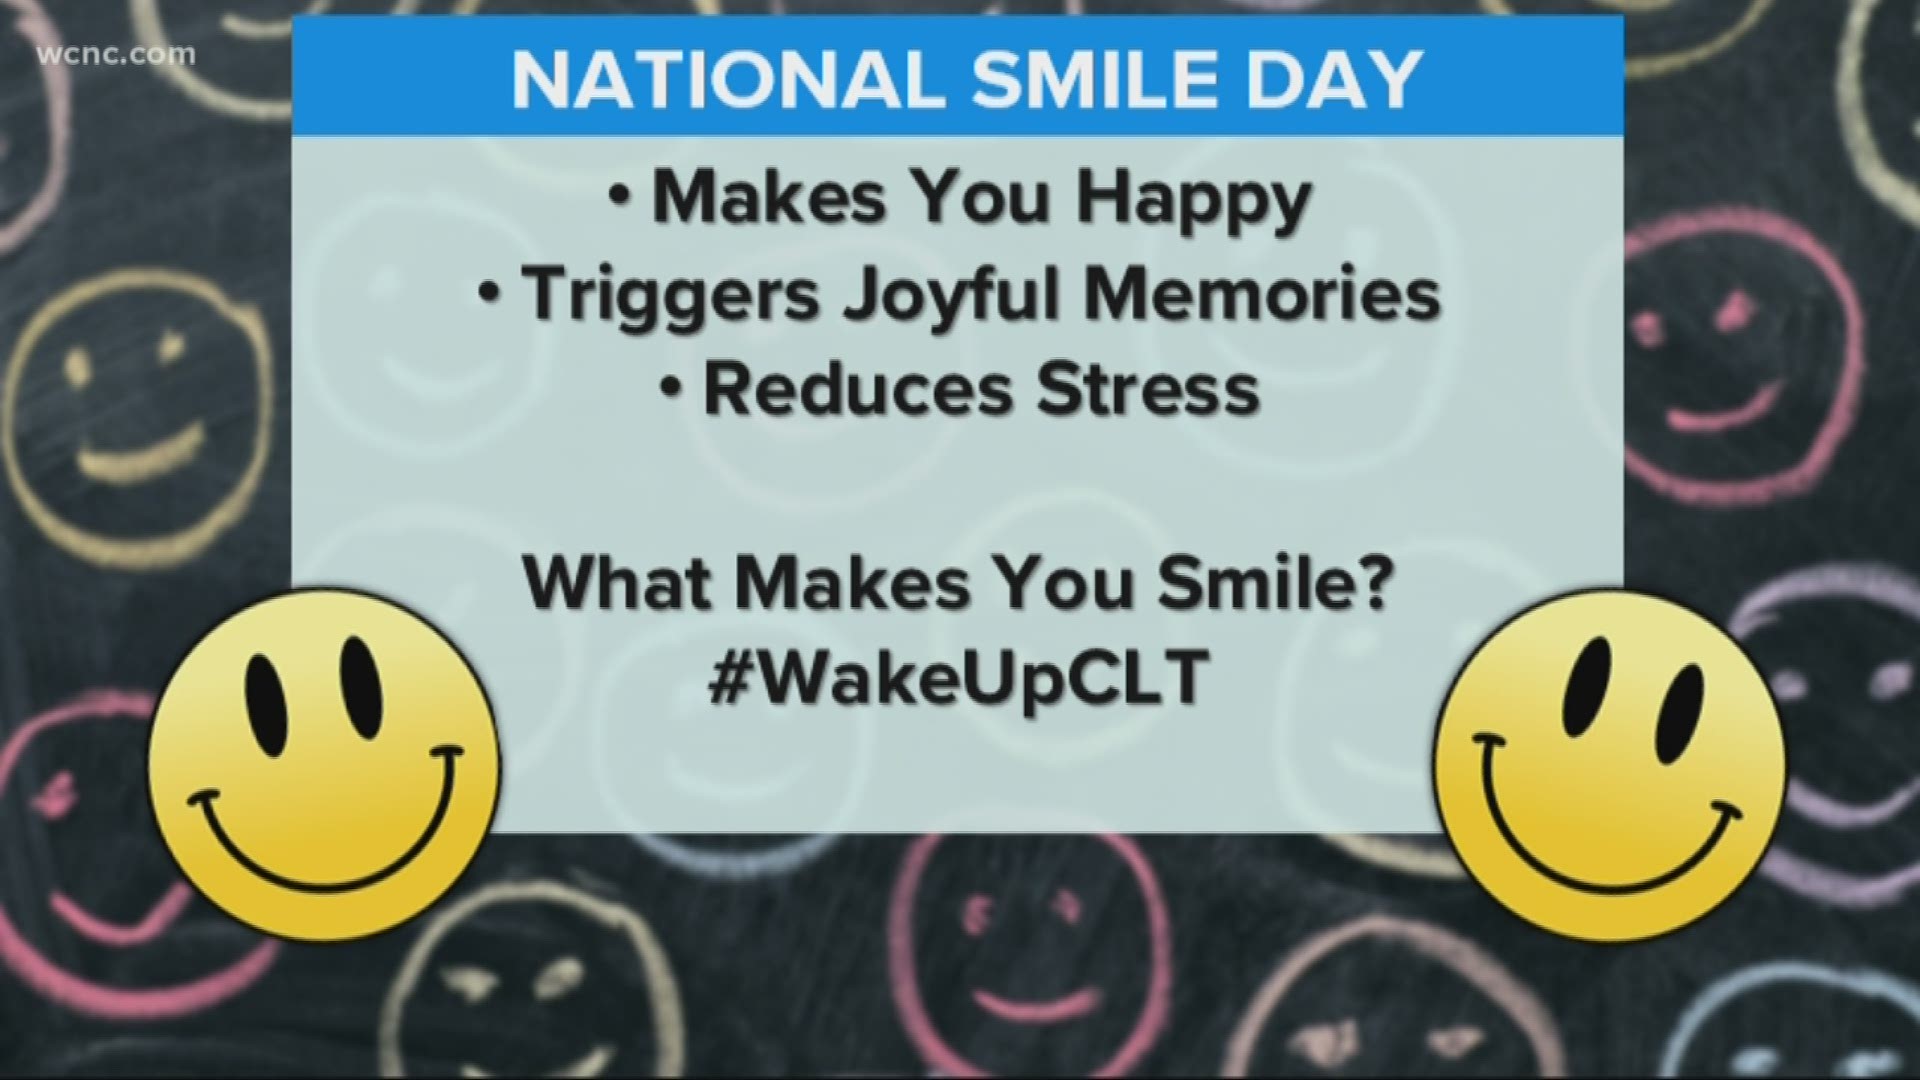 Here's another reason to be happy Friday. It's National Smile Day! Research says smiling is good for us, too! So flash those pearly whites and spread the positivity!